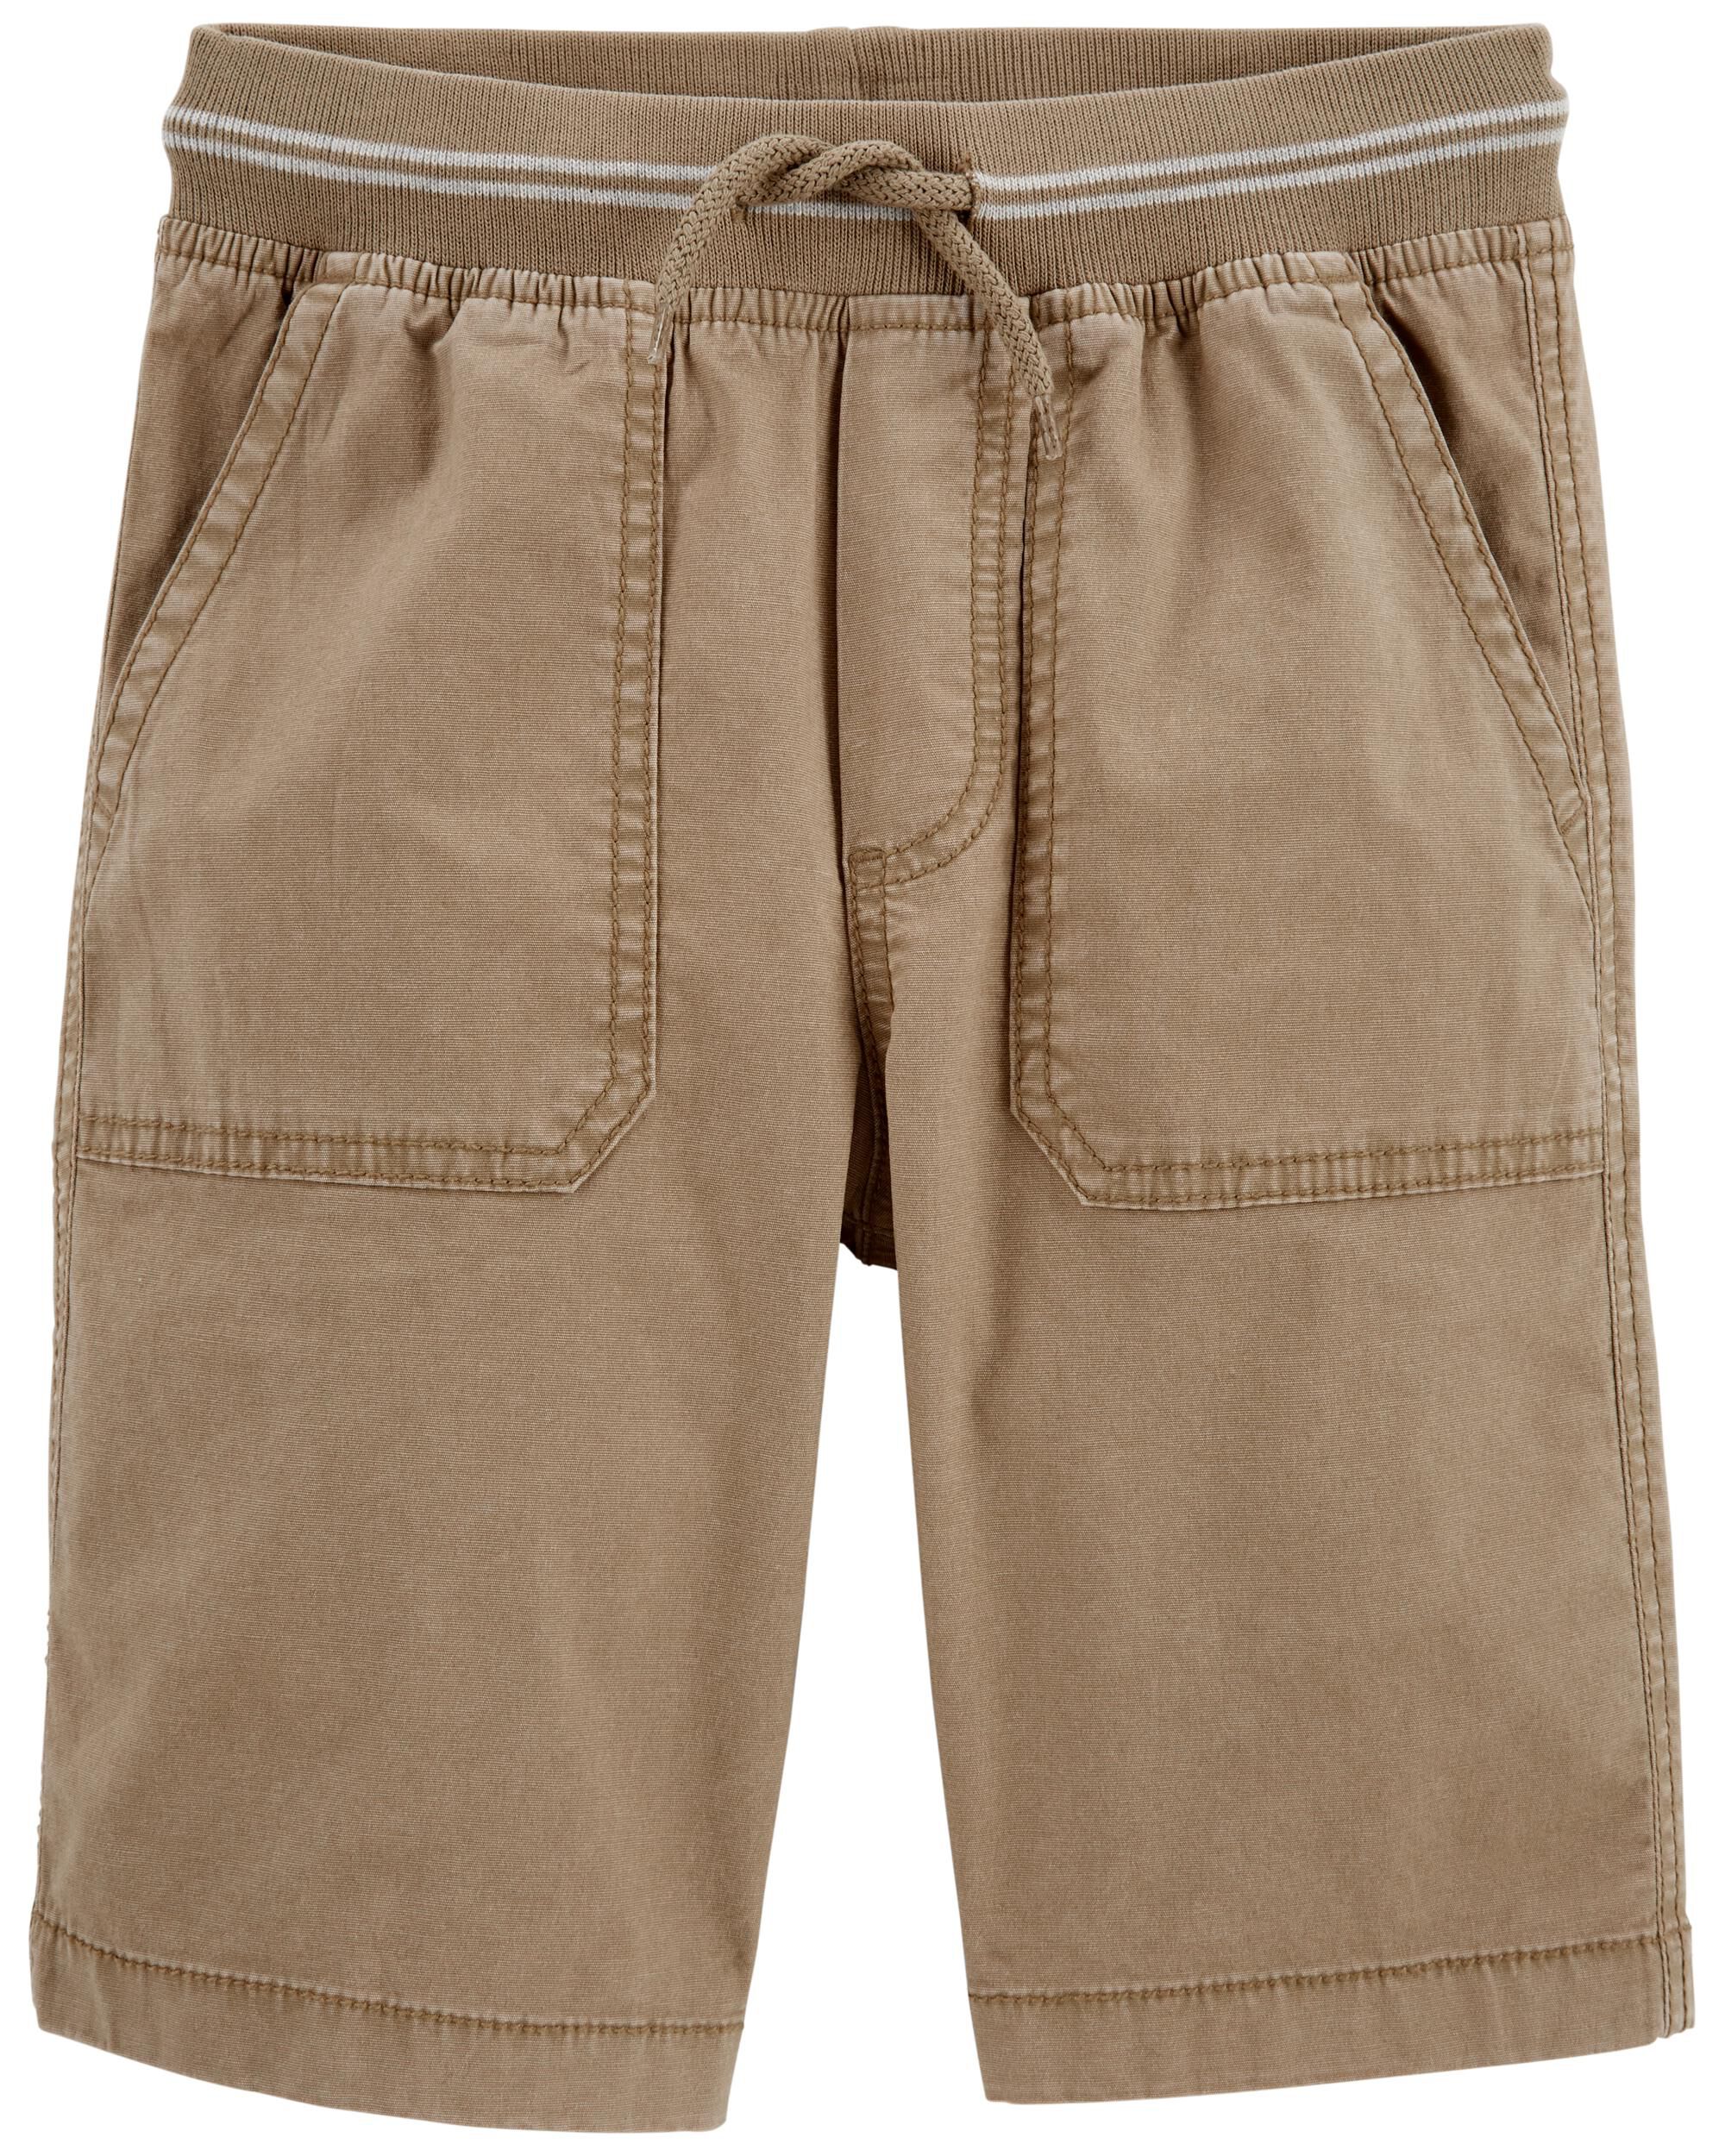  *DOORBUSTER* Pull-on Stretch Canvas Shorts 